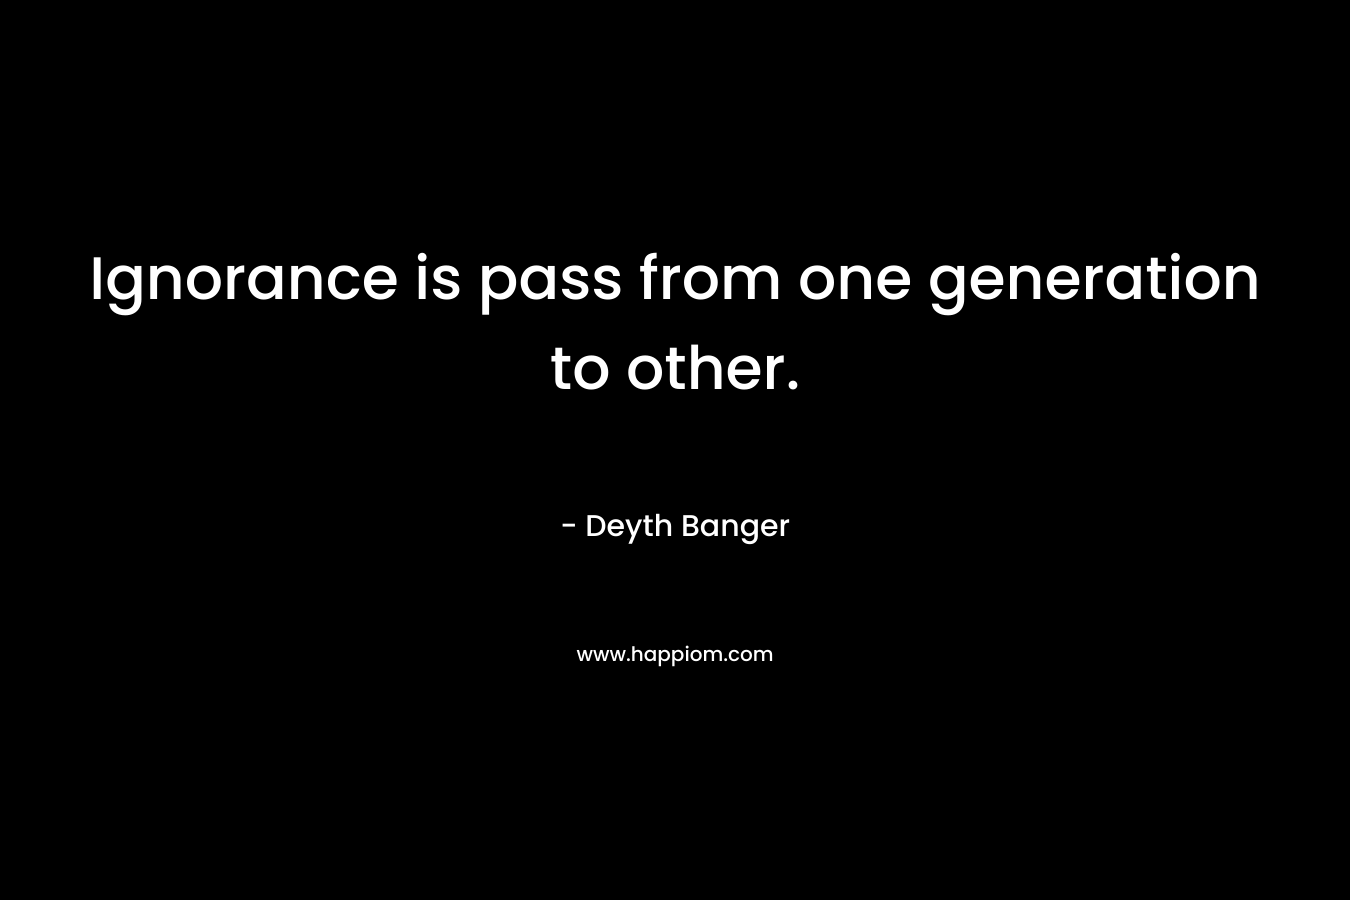 Ignorance is pass from one generation to other. – Deyth Banger